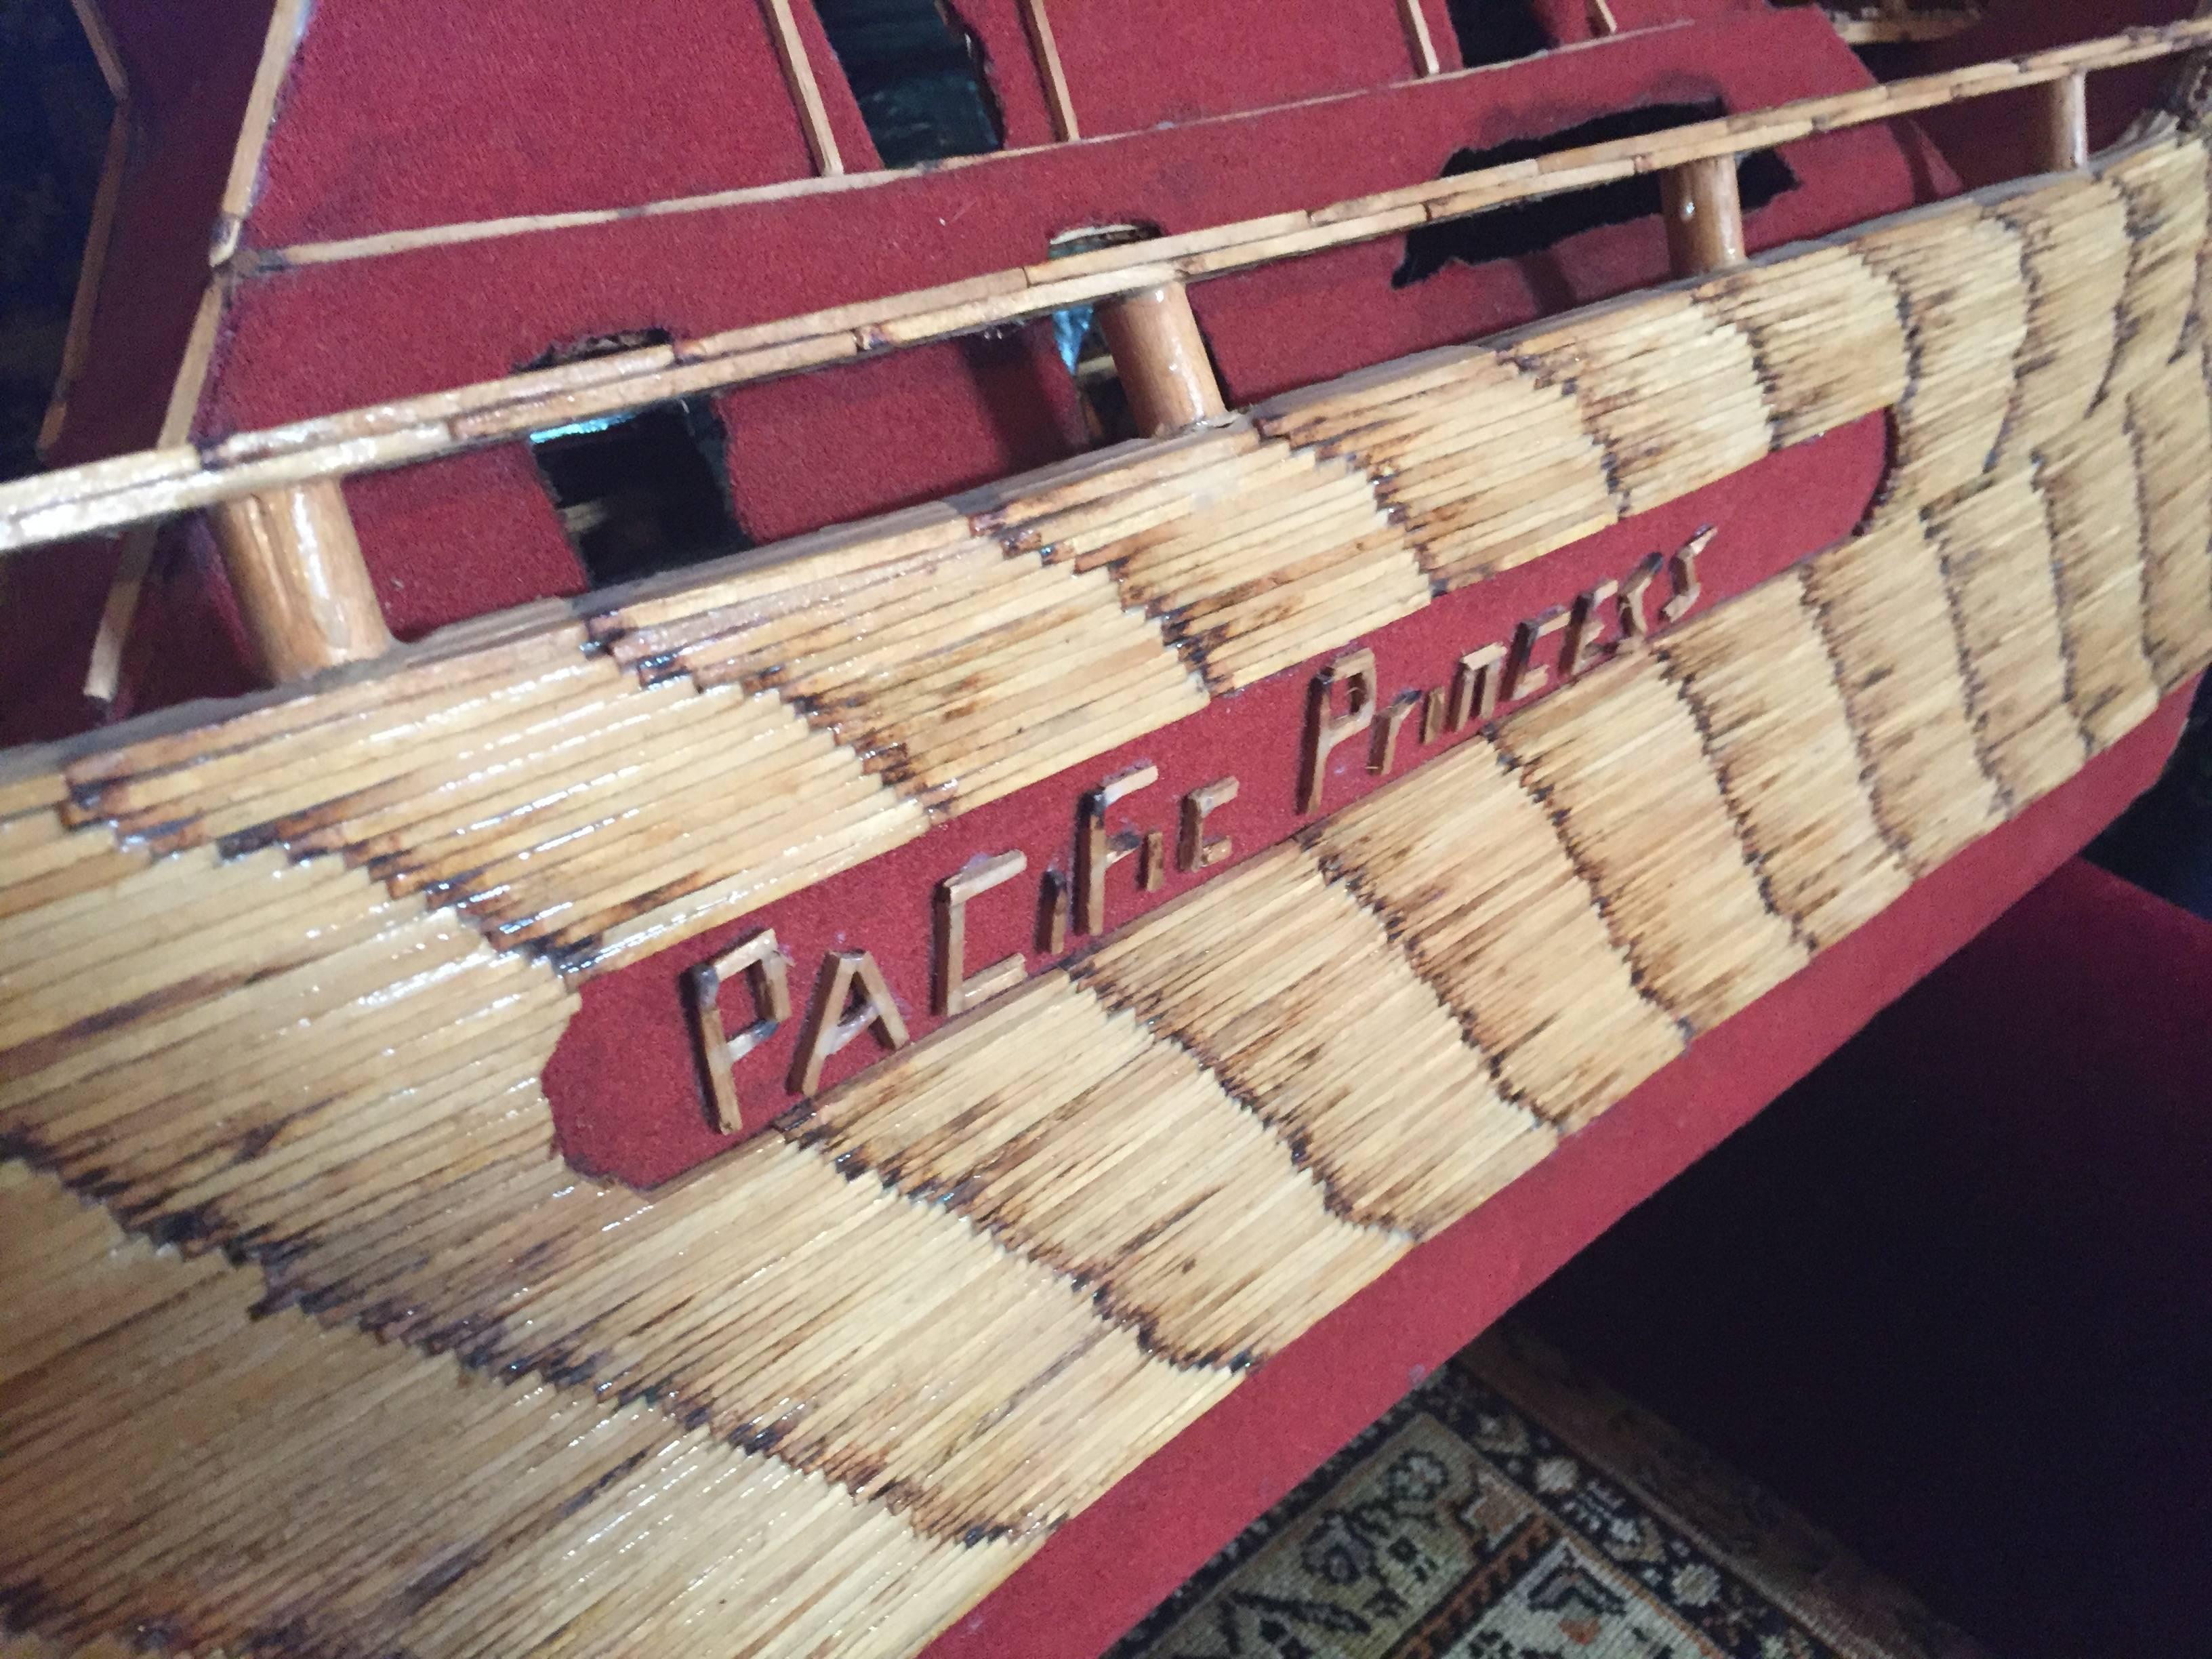 Folk Art Pacific Princess Ship made by sailors from World War-II
Made with matches and other wood and paint.